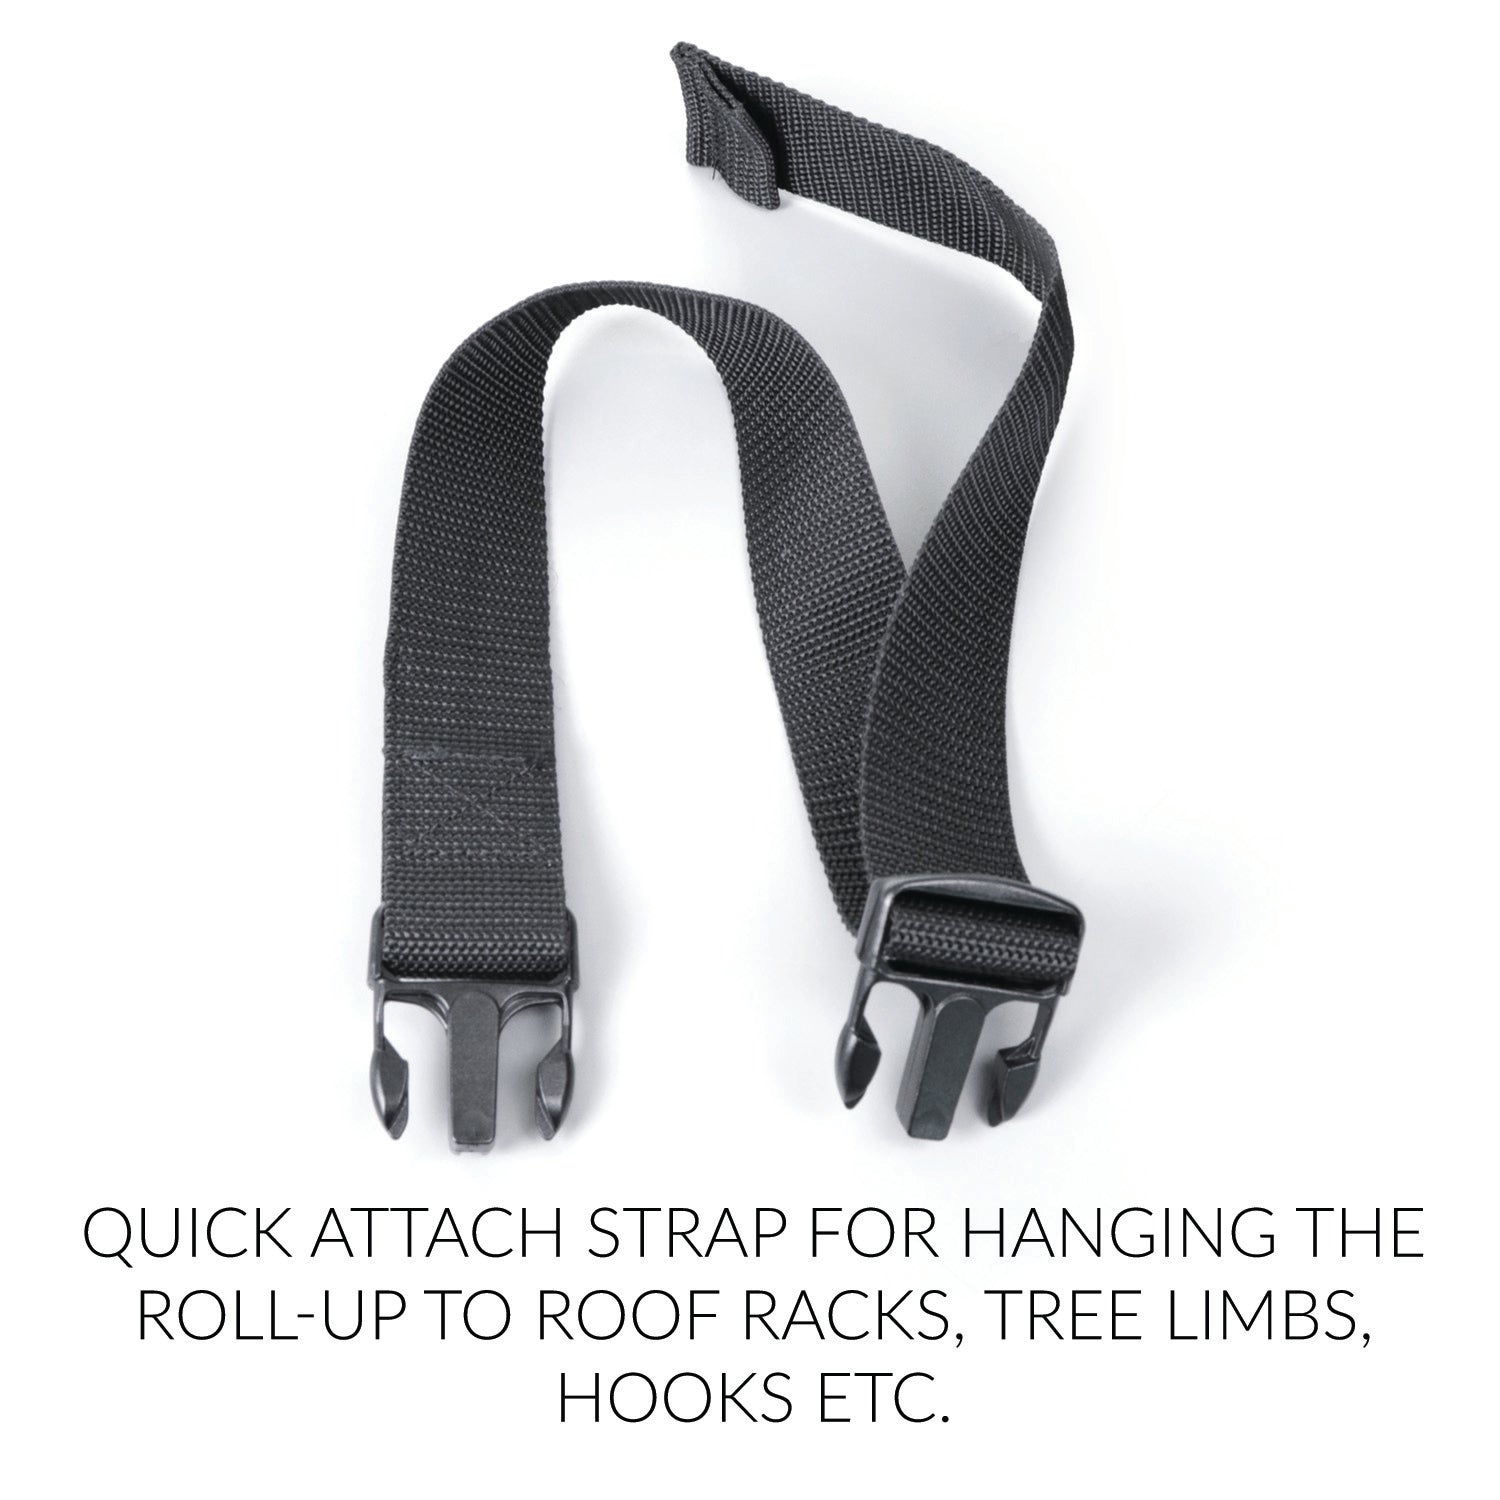 Quick attach strap for hanging the roll up to roof racks, tree limbs. hooks , ETC